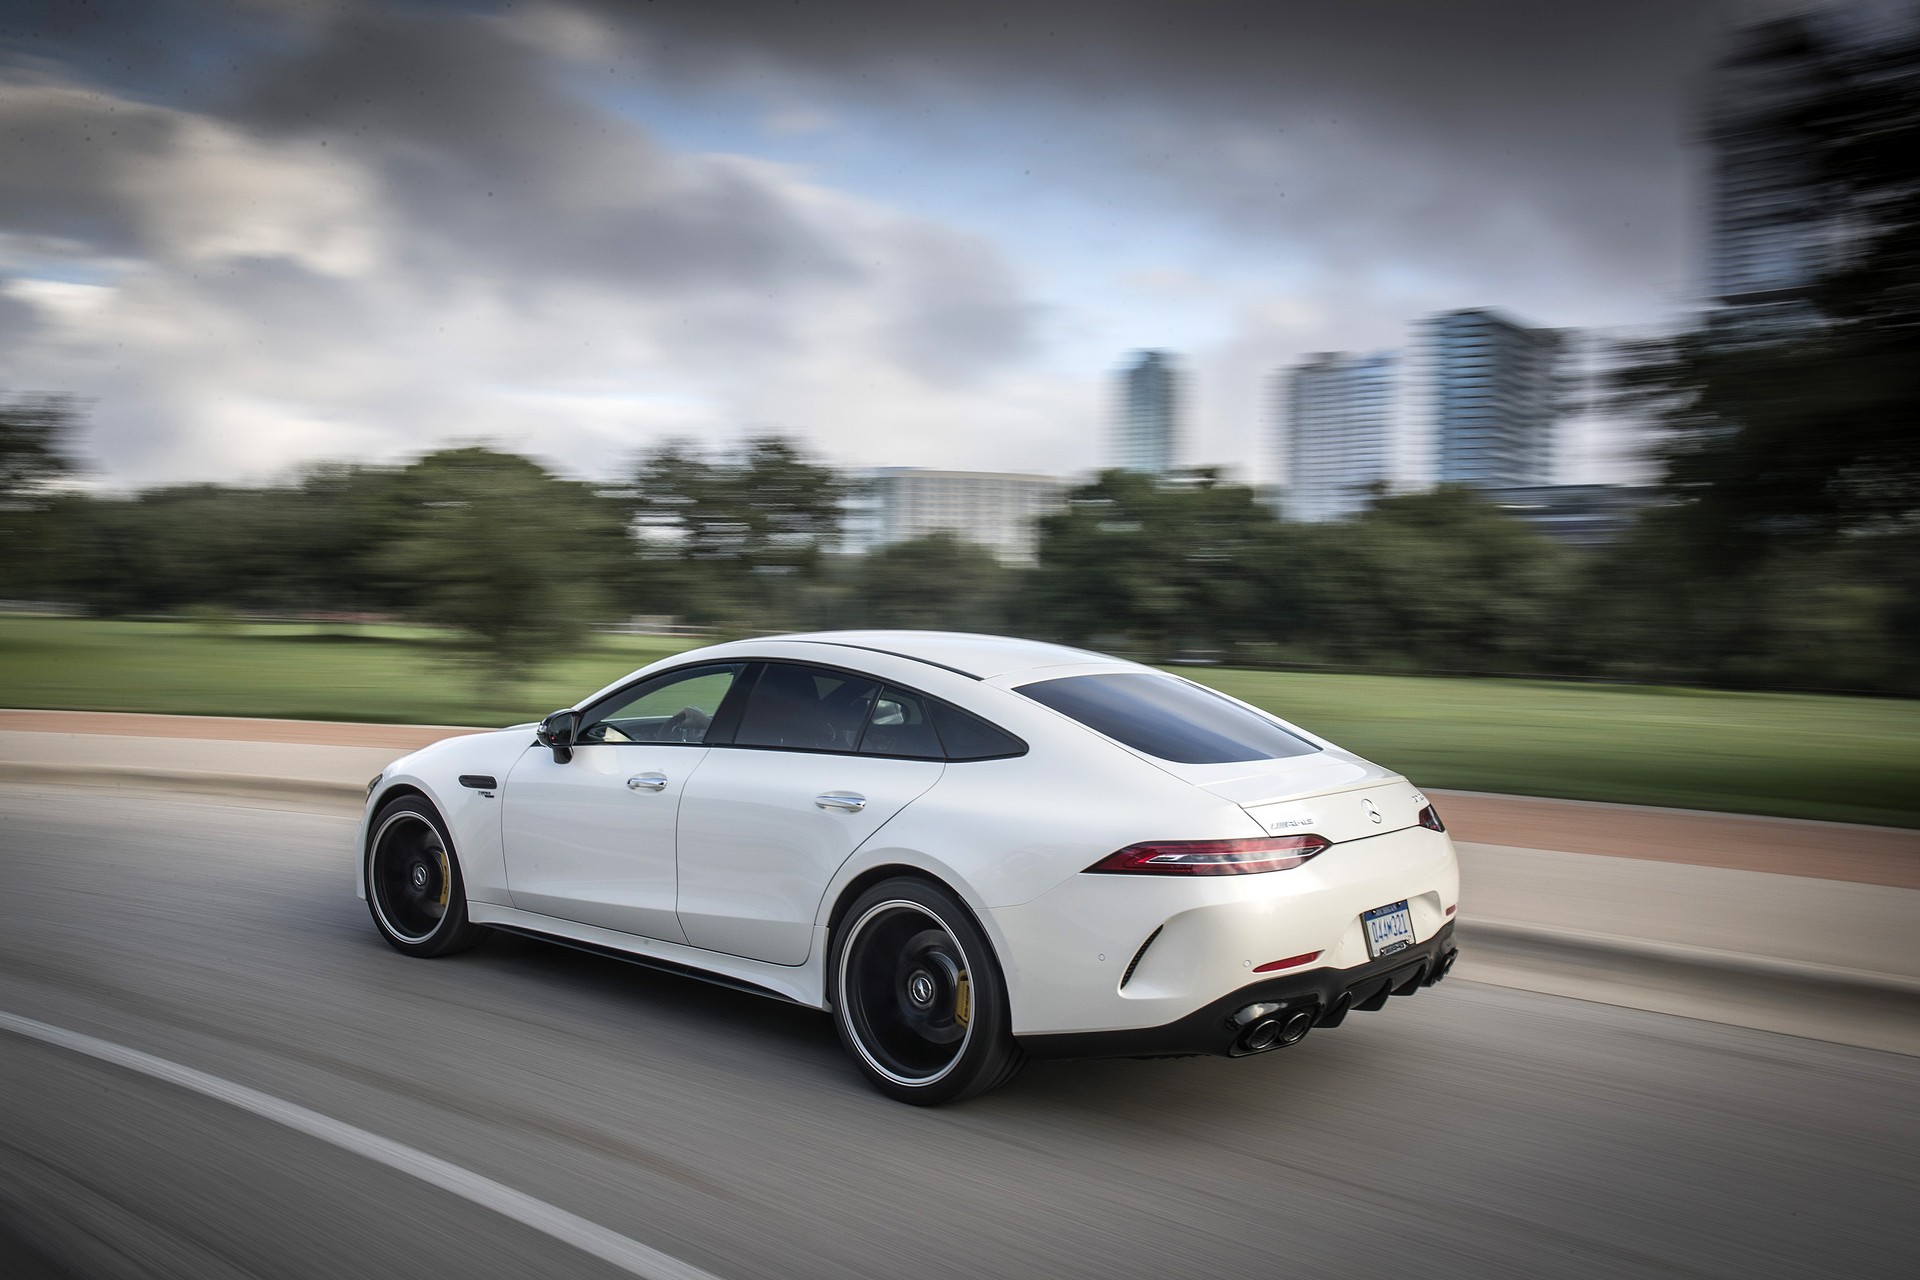 Mercedes Amg Gt 53 4 Door Coupe Defies Entry Level Status With Nearly Six Figure Price Carscoops